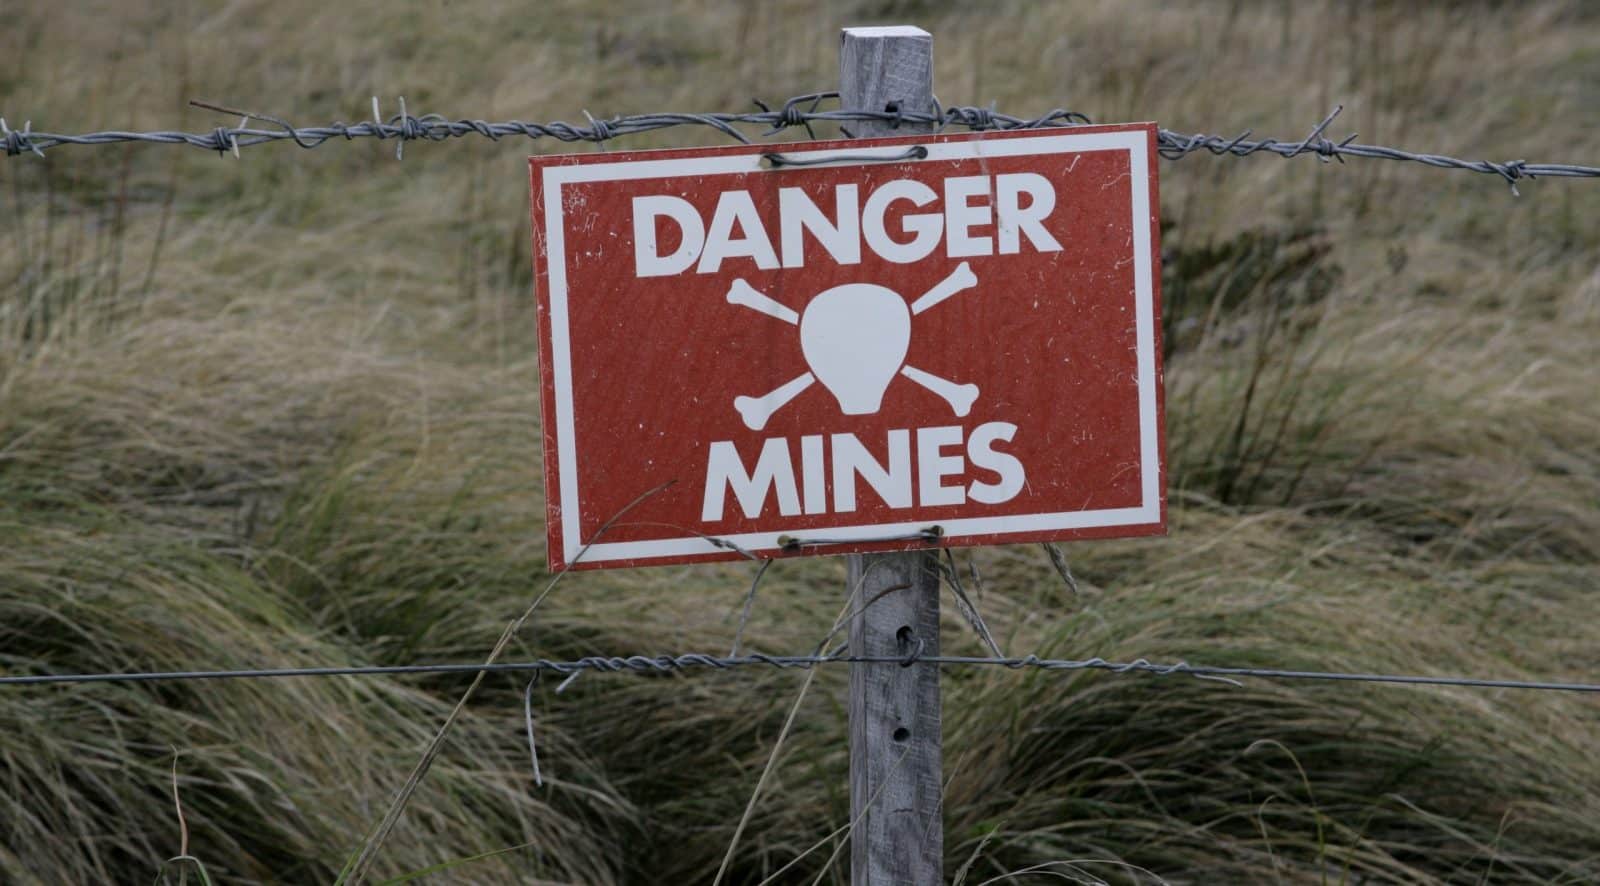 Russia has created a minefield in Ukraine, larger than the area of Britain, Romania or Laos